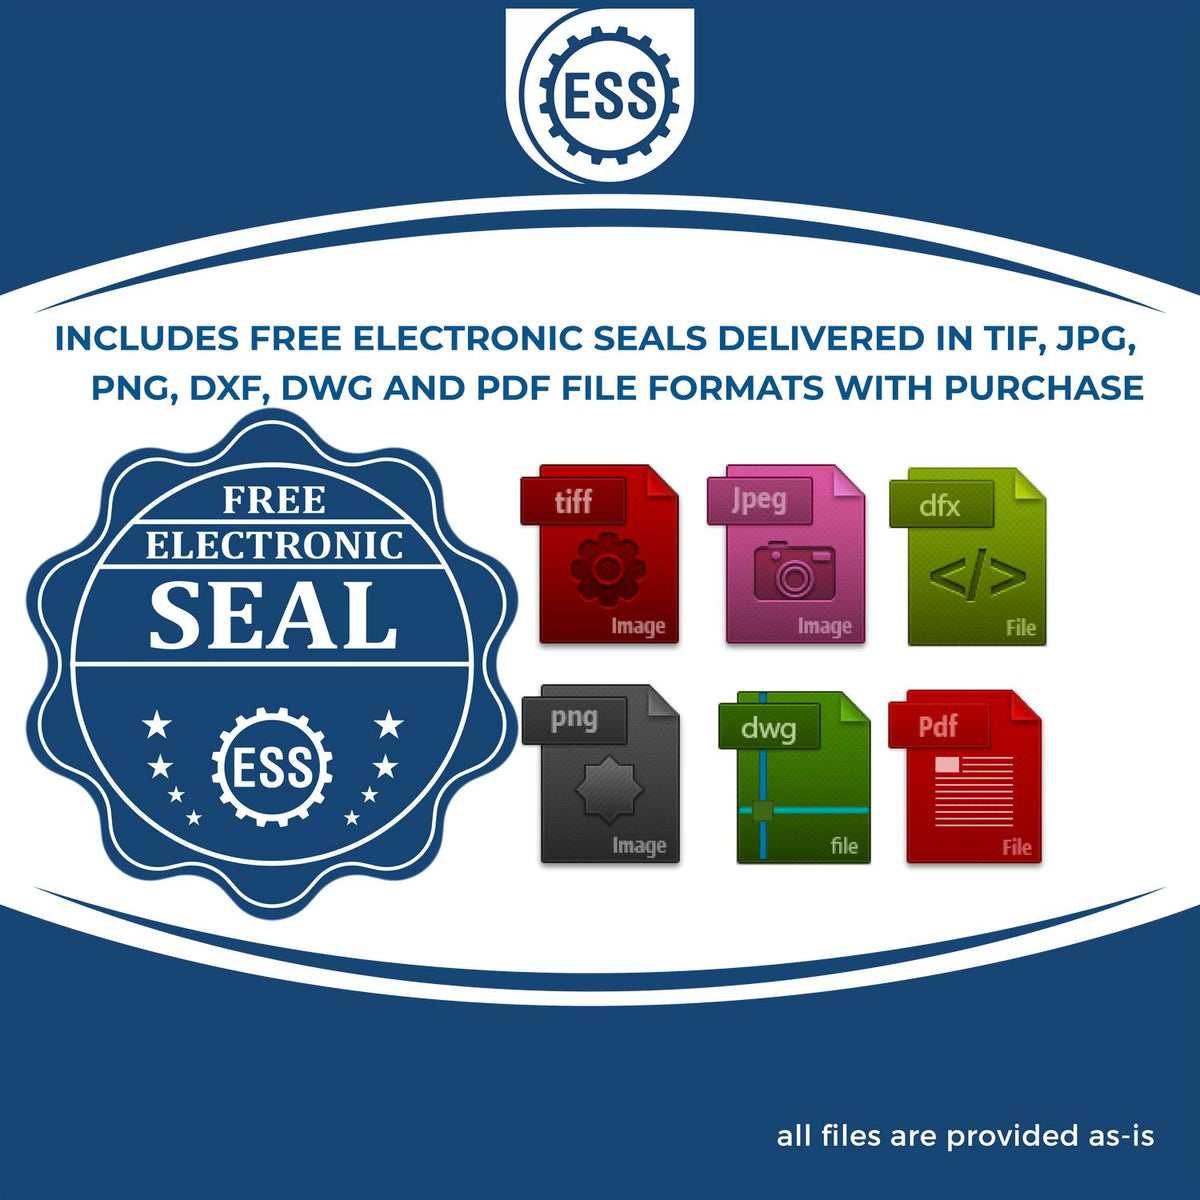 An infographic for the free electronic seal for the State of Minnesota Long Reach Architectural Embossing Seal illustrating the different file type icons such as DXF, DWG, TIF, JPG and PNG.